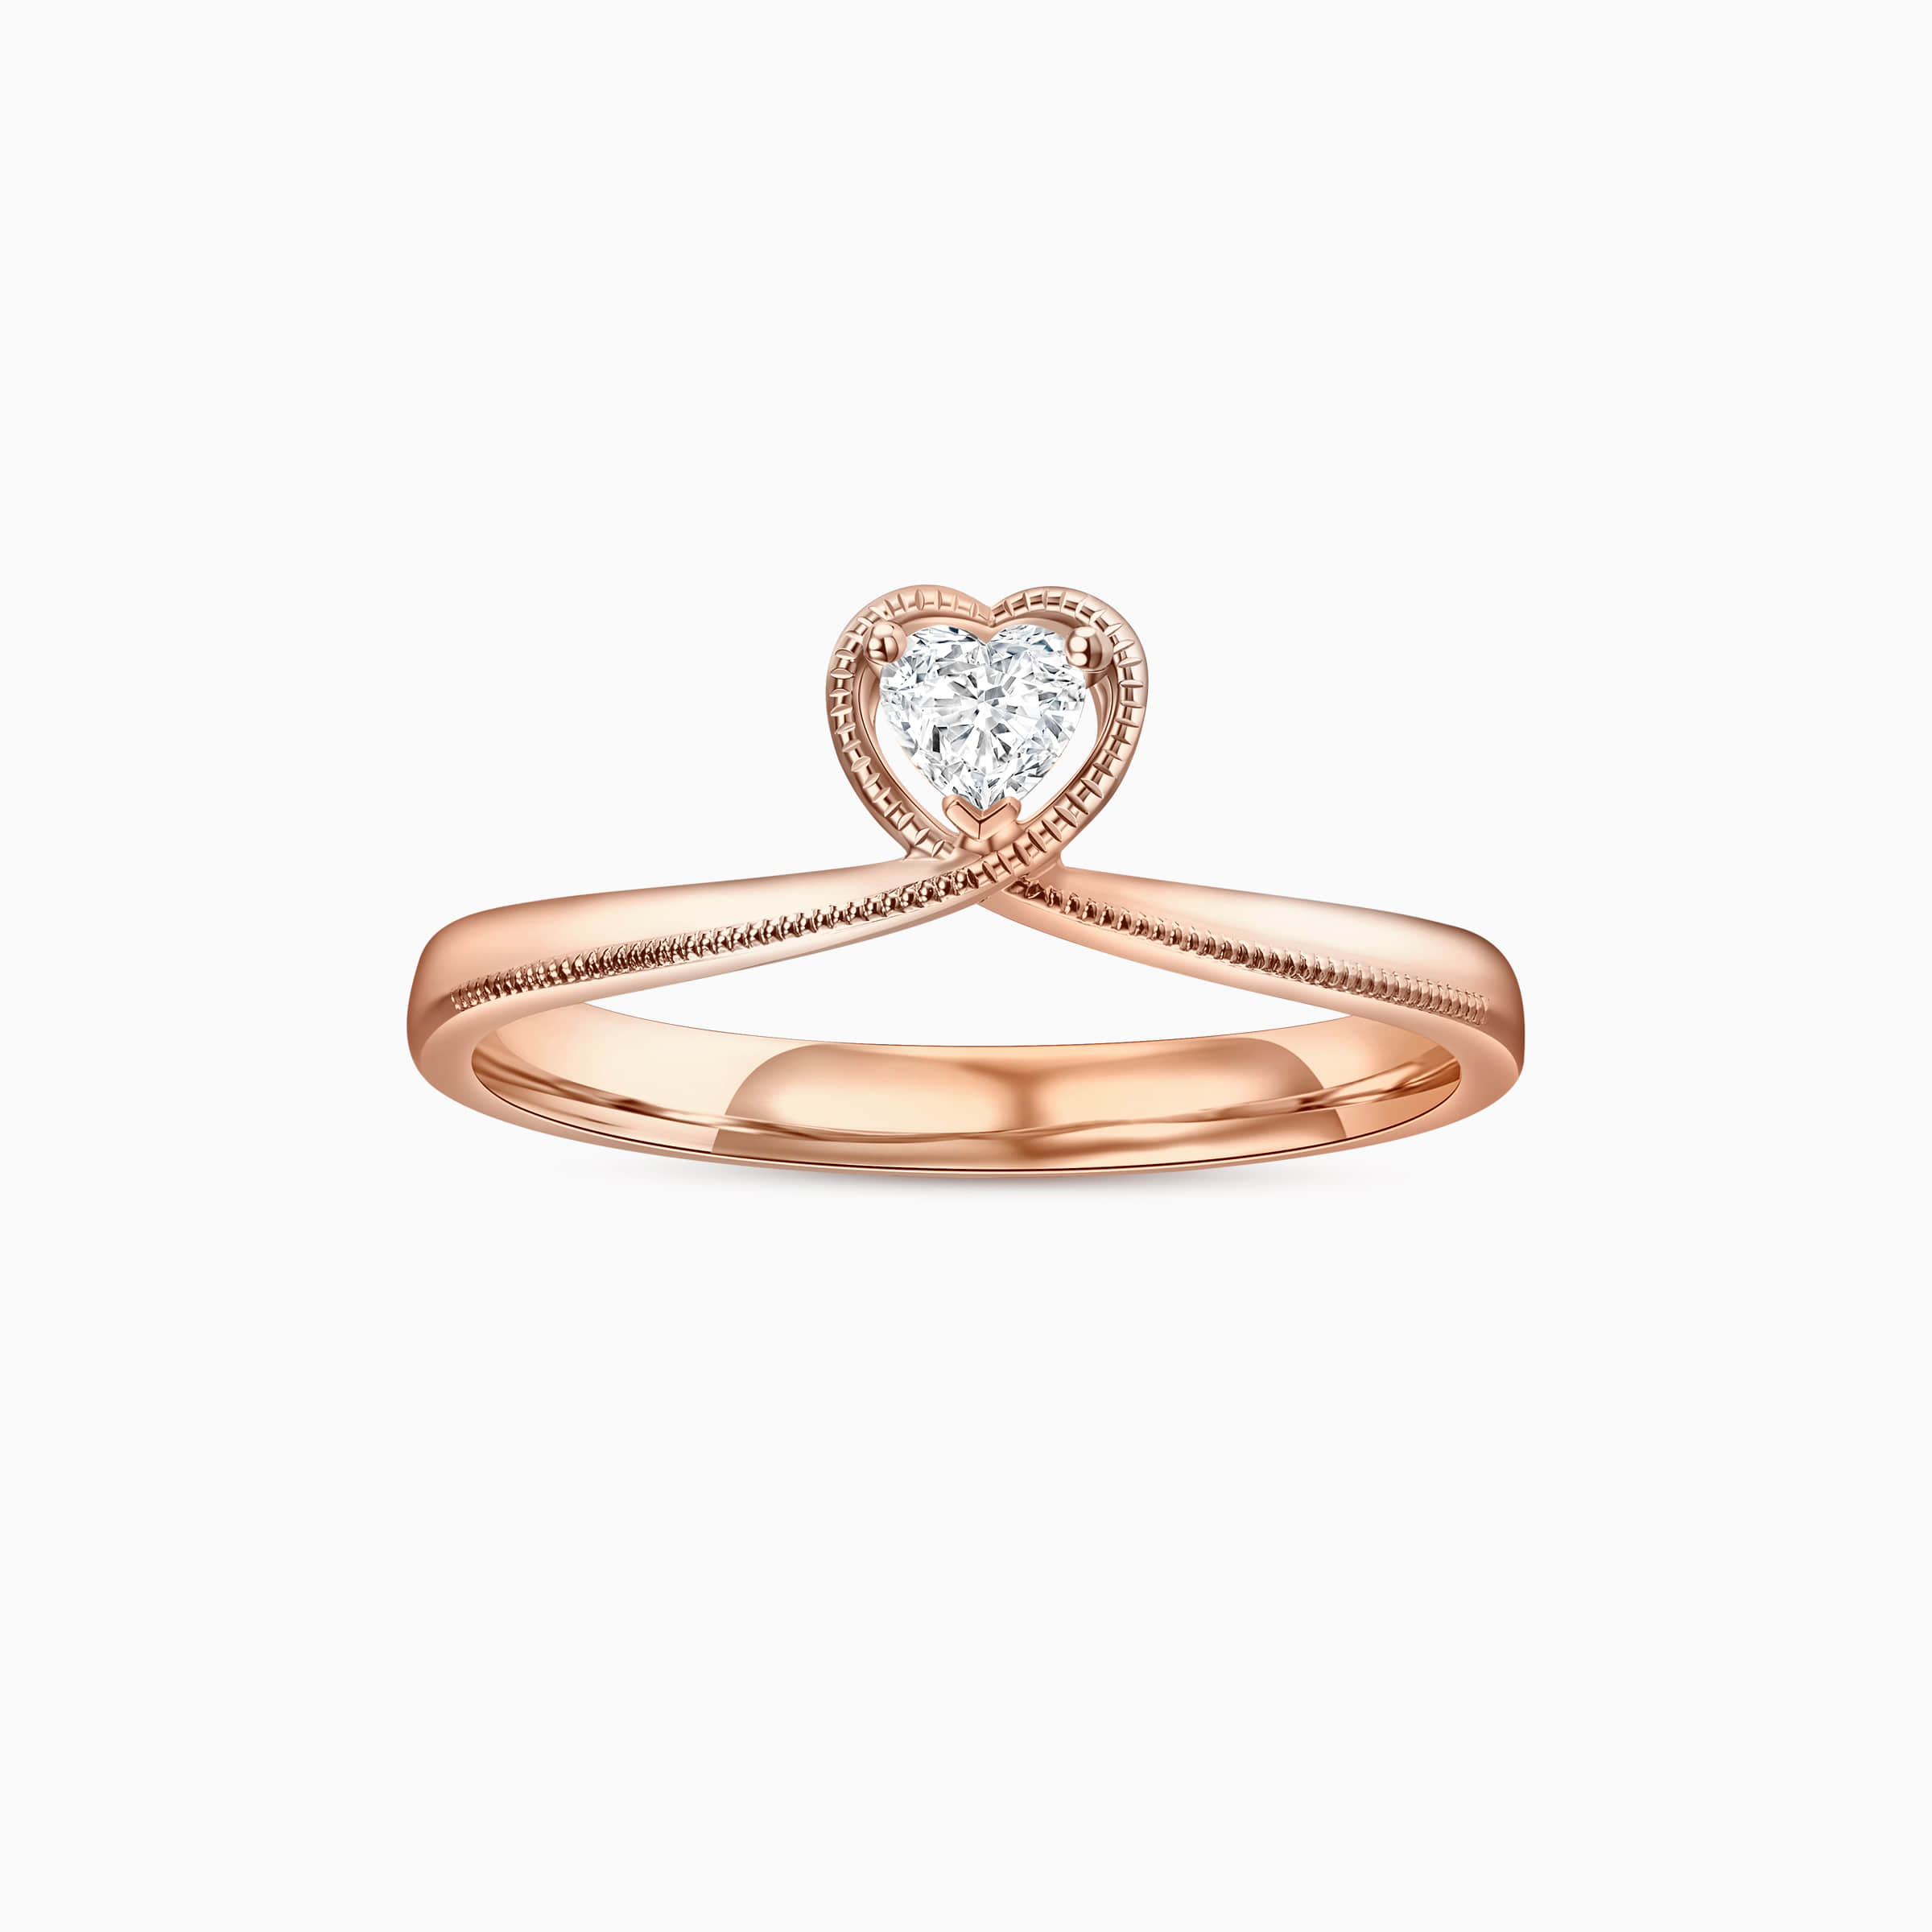 Darry Ring heart shaped promise ring rose gold